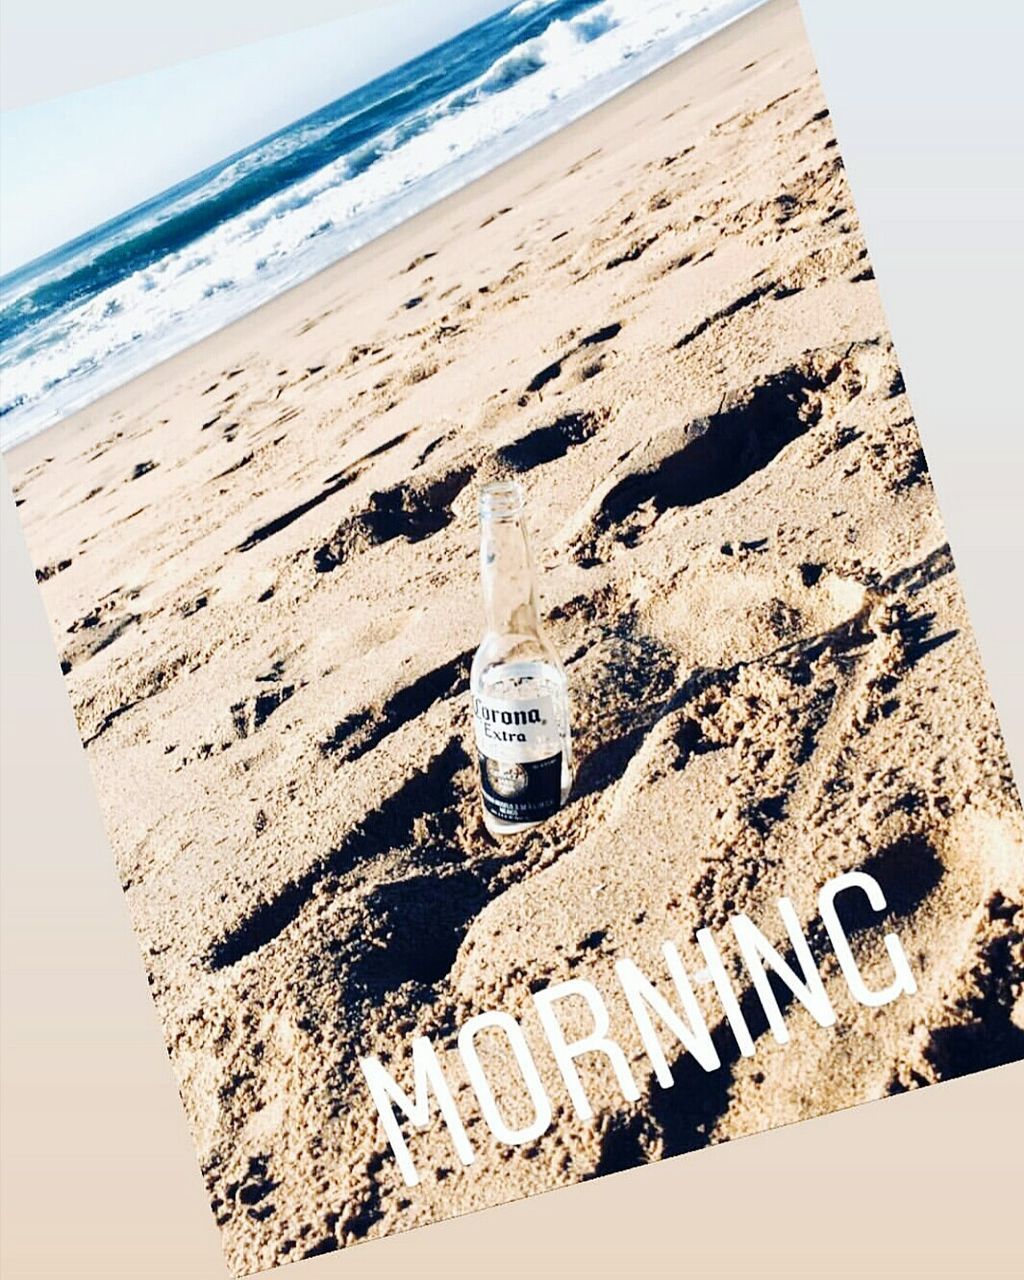 water, beach, land, sand, sea, nature, day, bottle, container, no people, sunlight, high angle view, sky, outdoors, beauty in nature, scenics - nature, tranquility, horizon over water, shadow